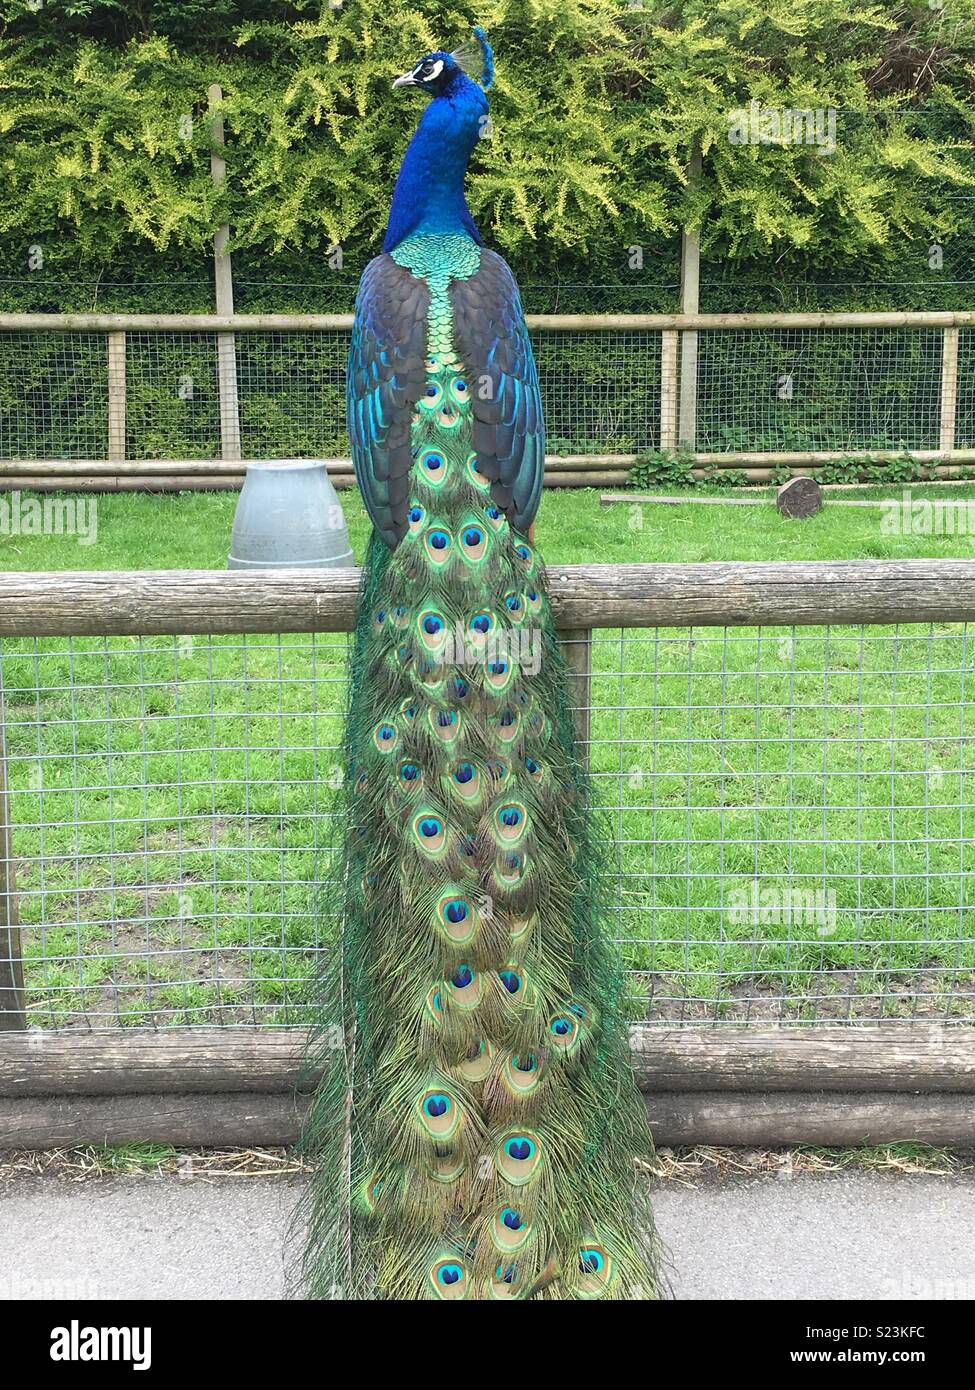 majestic-peacock-perched-on-a-fence-showing-beautiful-tail-feathers-S23KFC.jpg